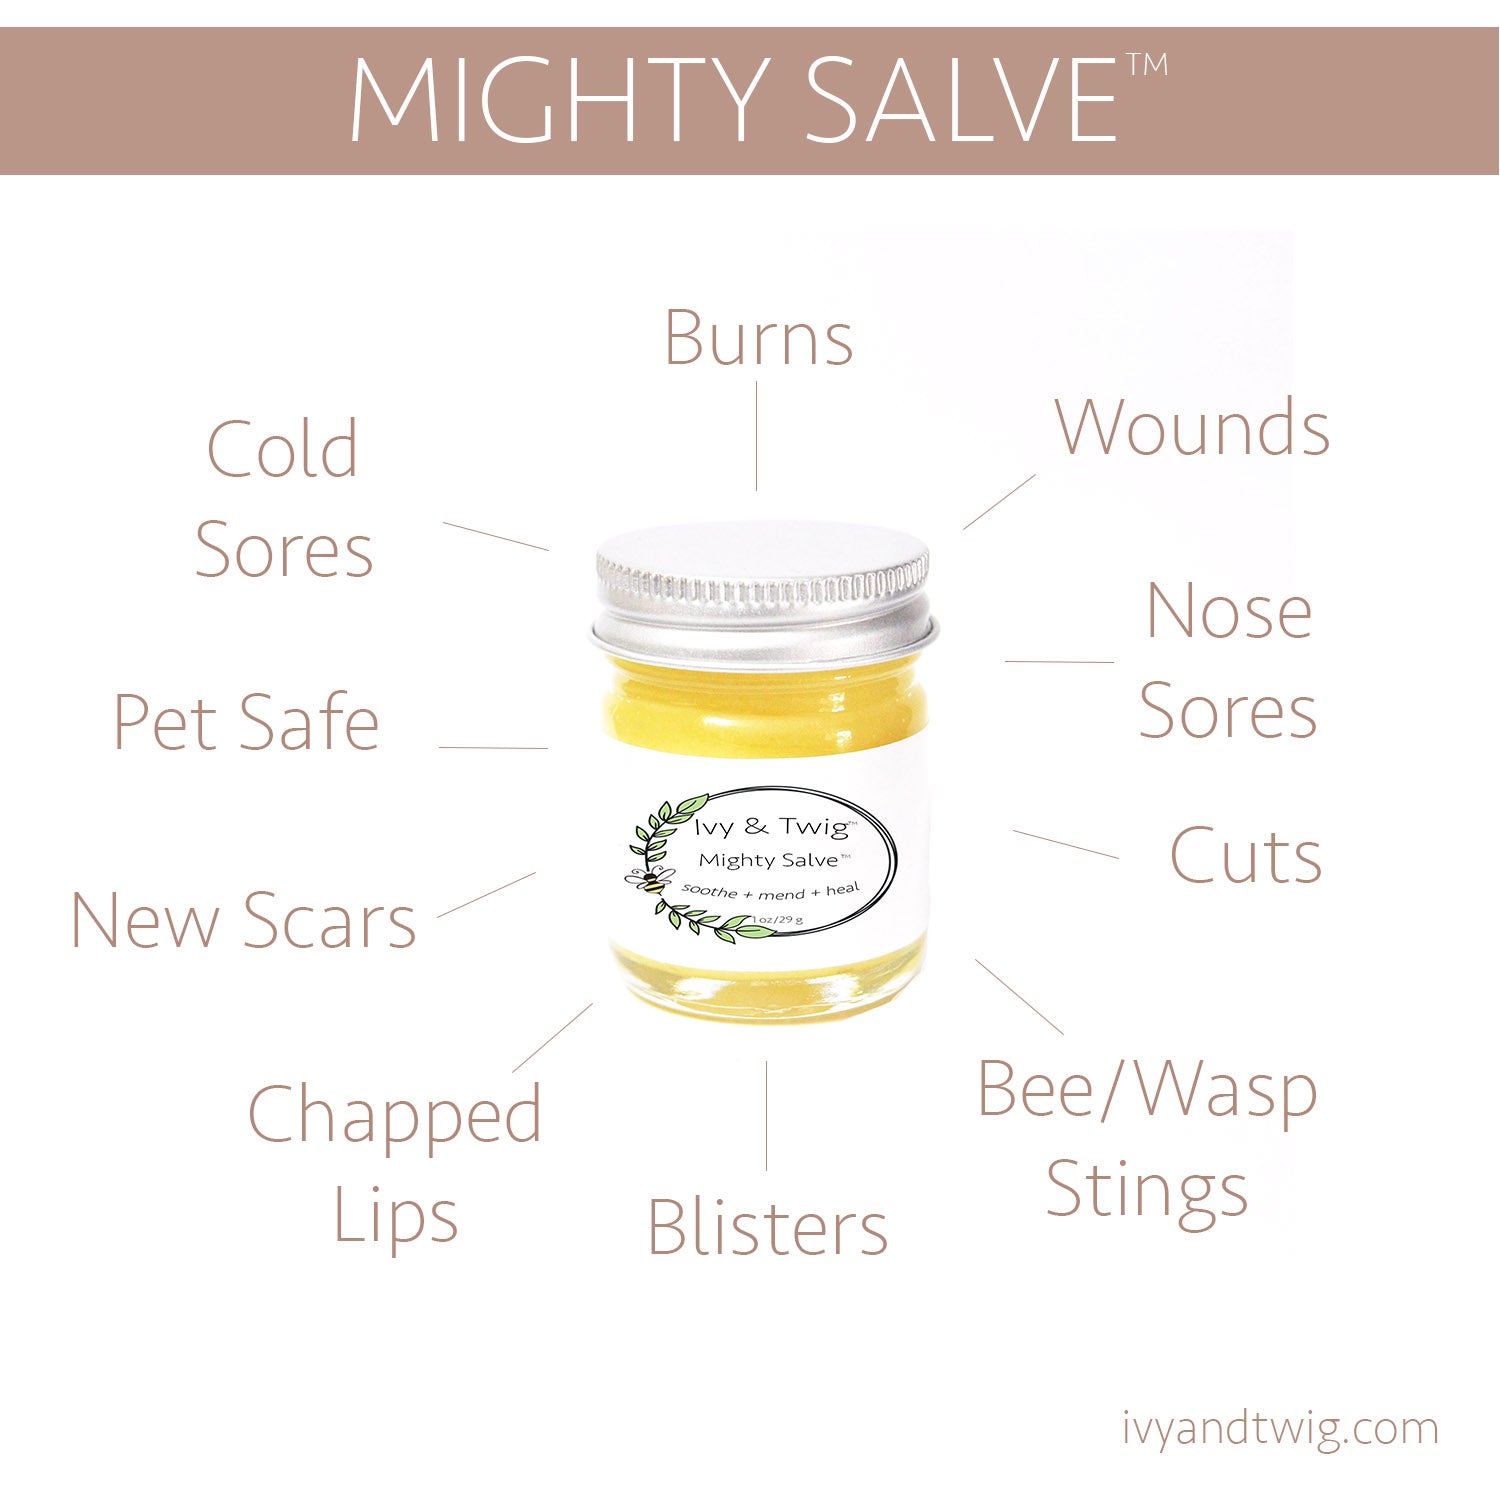 MIGHTY SALVE™ RAW HONEY ANTI-BACTERIAL HEALING OINTMENT – Ivy & Twig